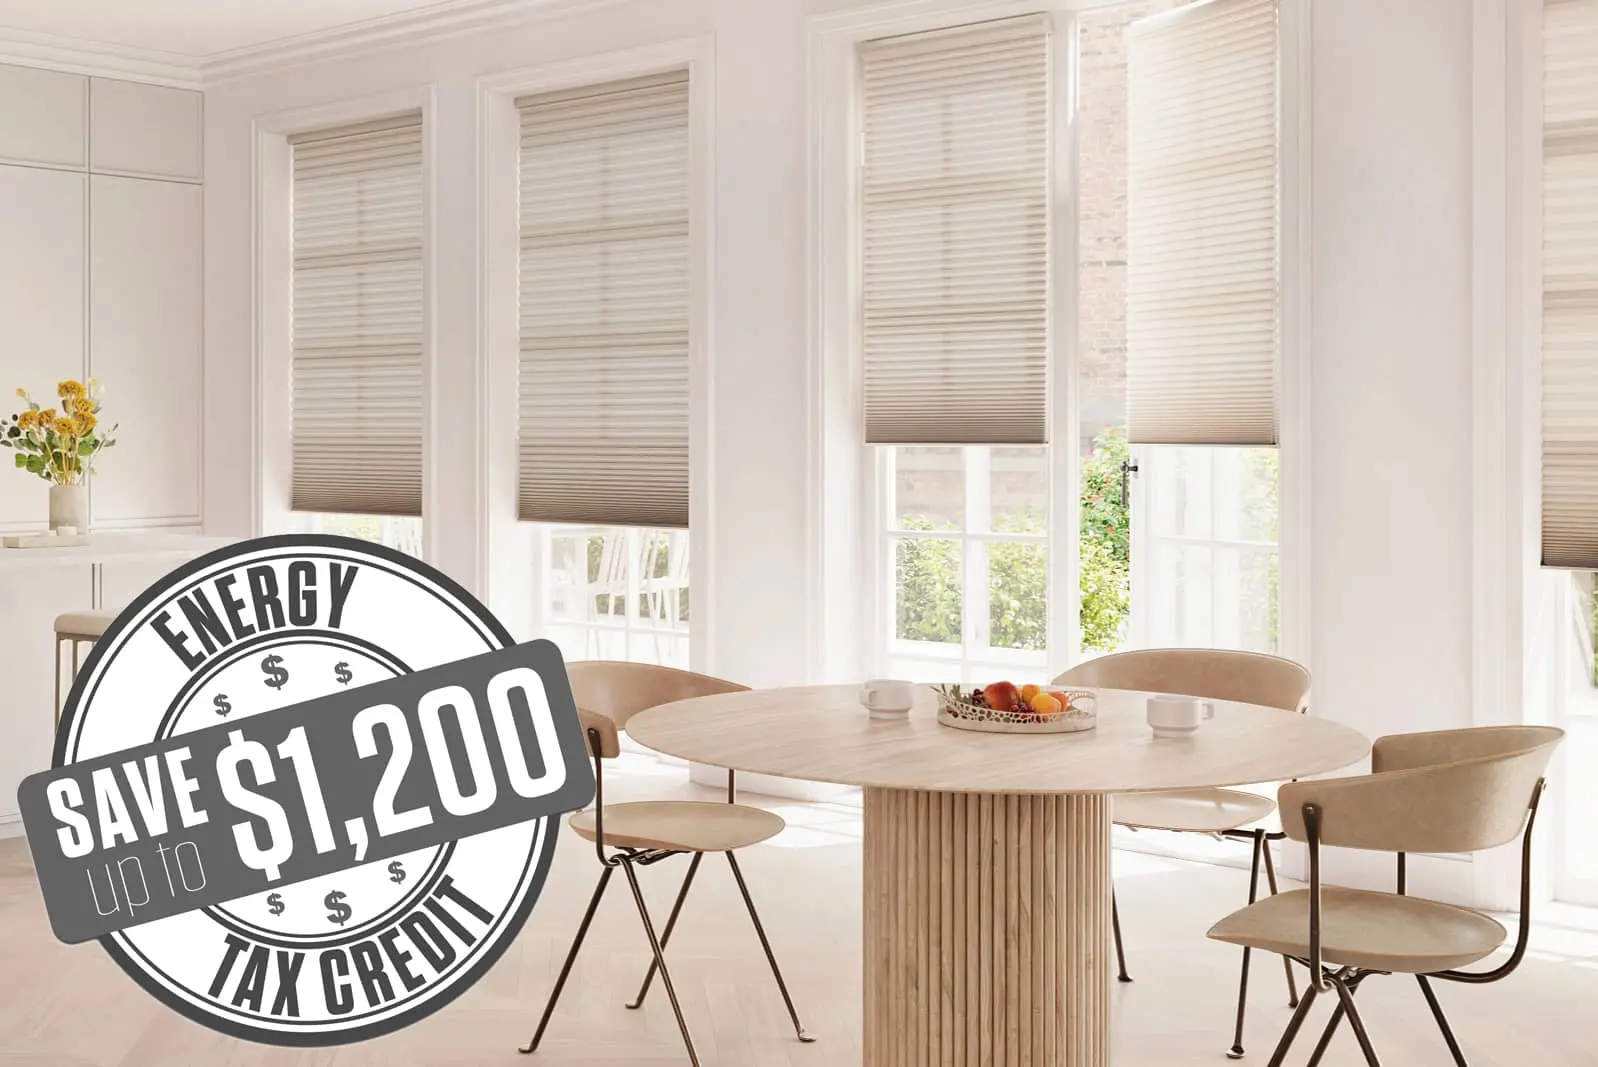 Duette honeycomb shades qualify for the Federal energy tax credit